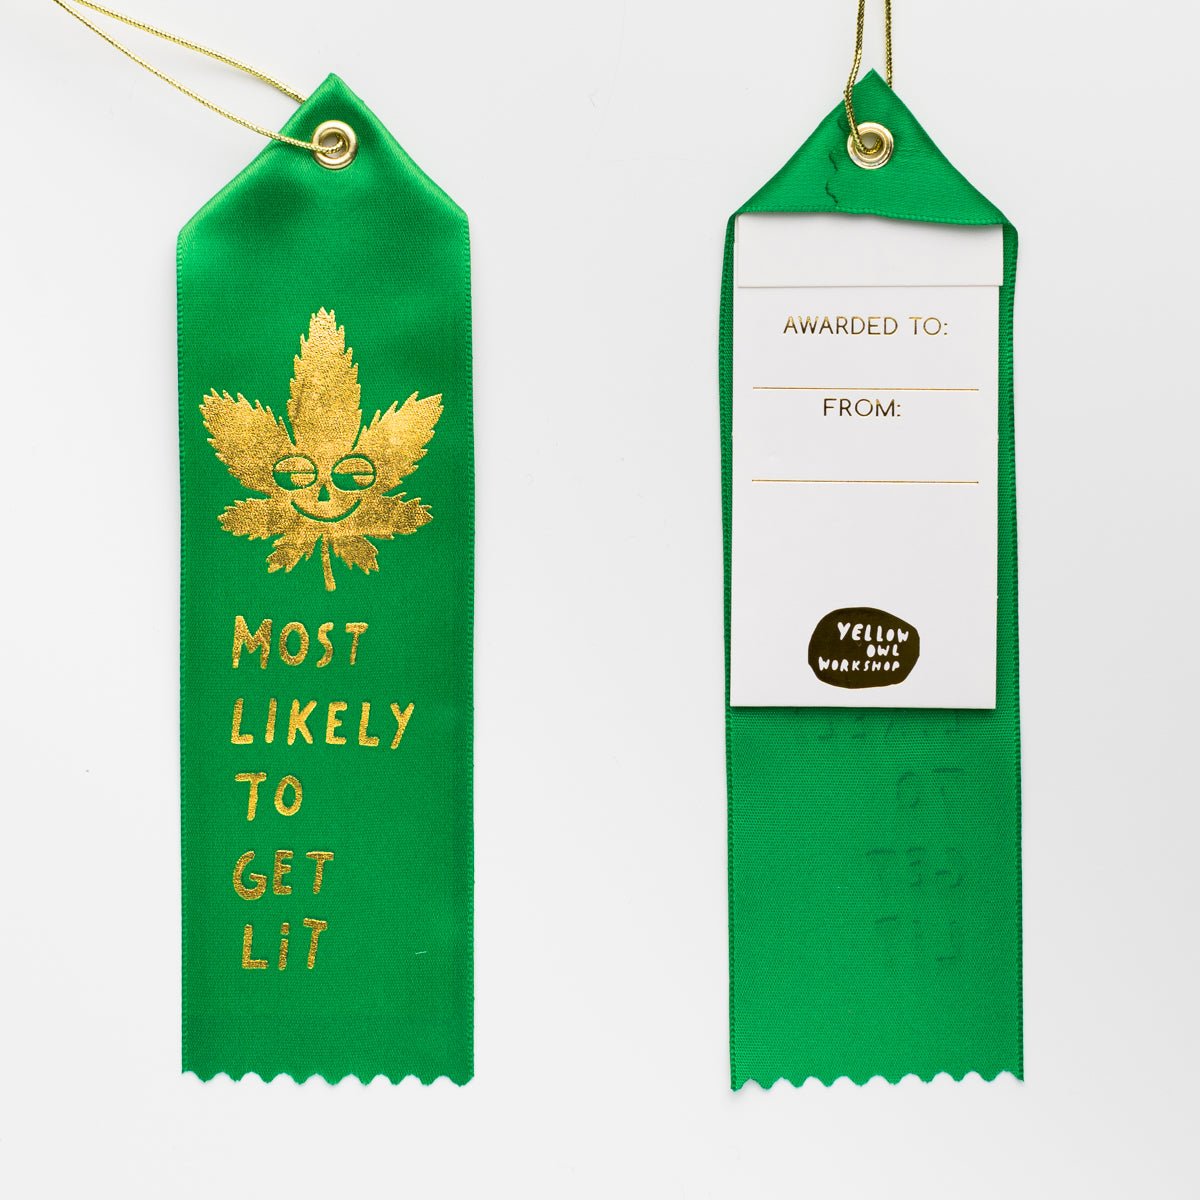 Most Likely To Get Lit - Award Ribbon Card - Yellow Owl Workshop